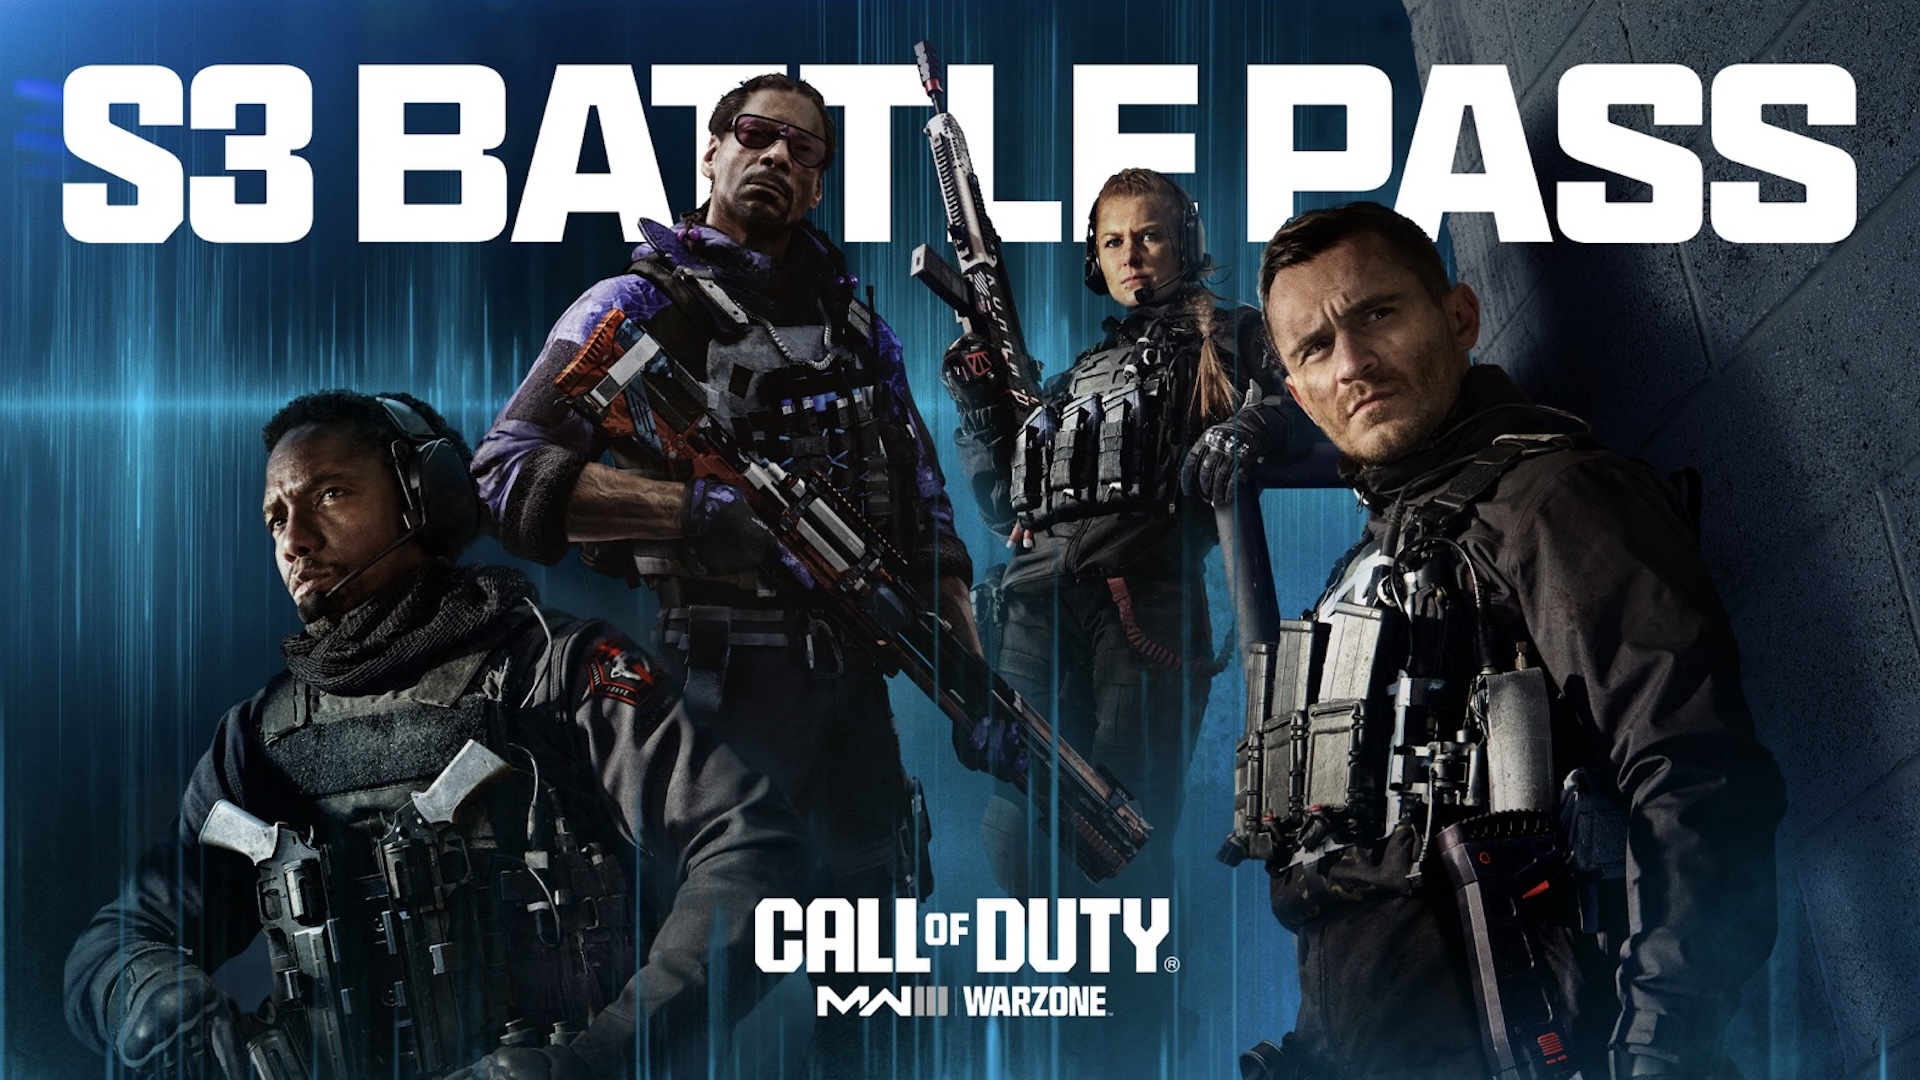 Call of Duty Operators stand against a blue background. 'S3 Battle Pass' is written in white lettering above them.